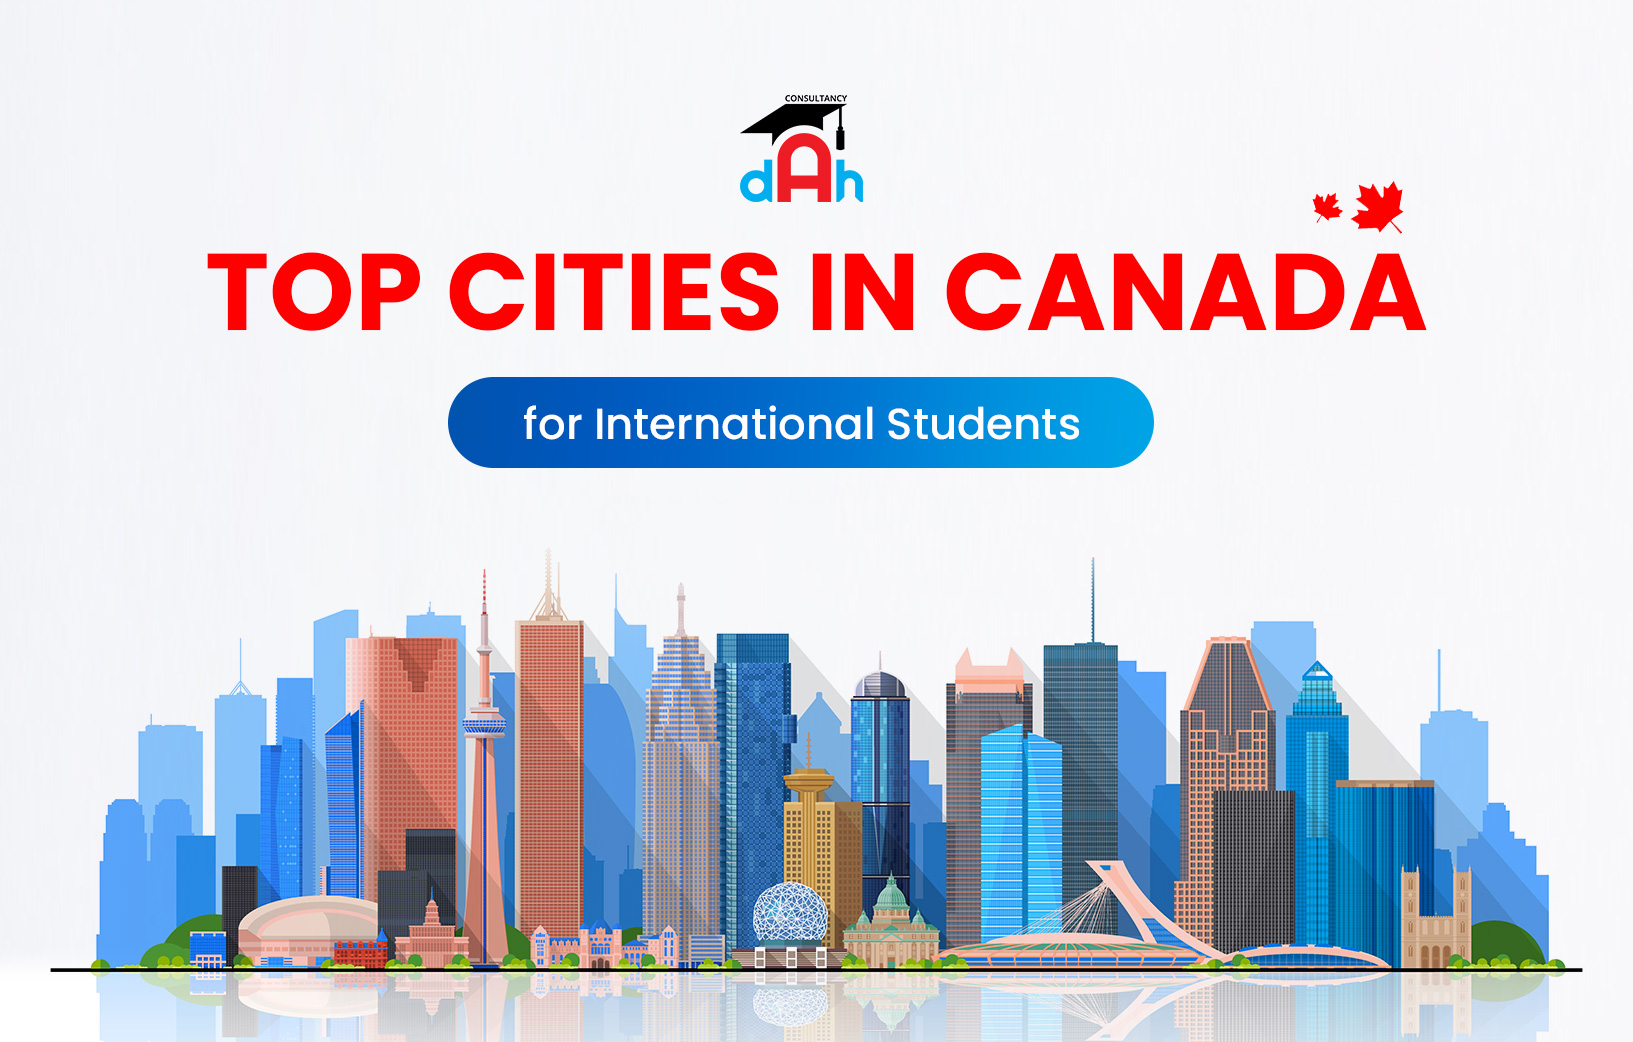 Top Cities in Canada for International Students